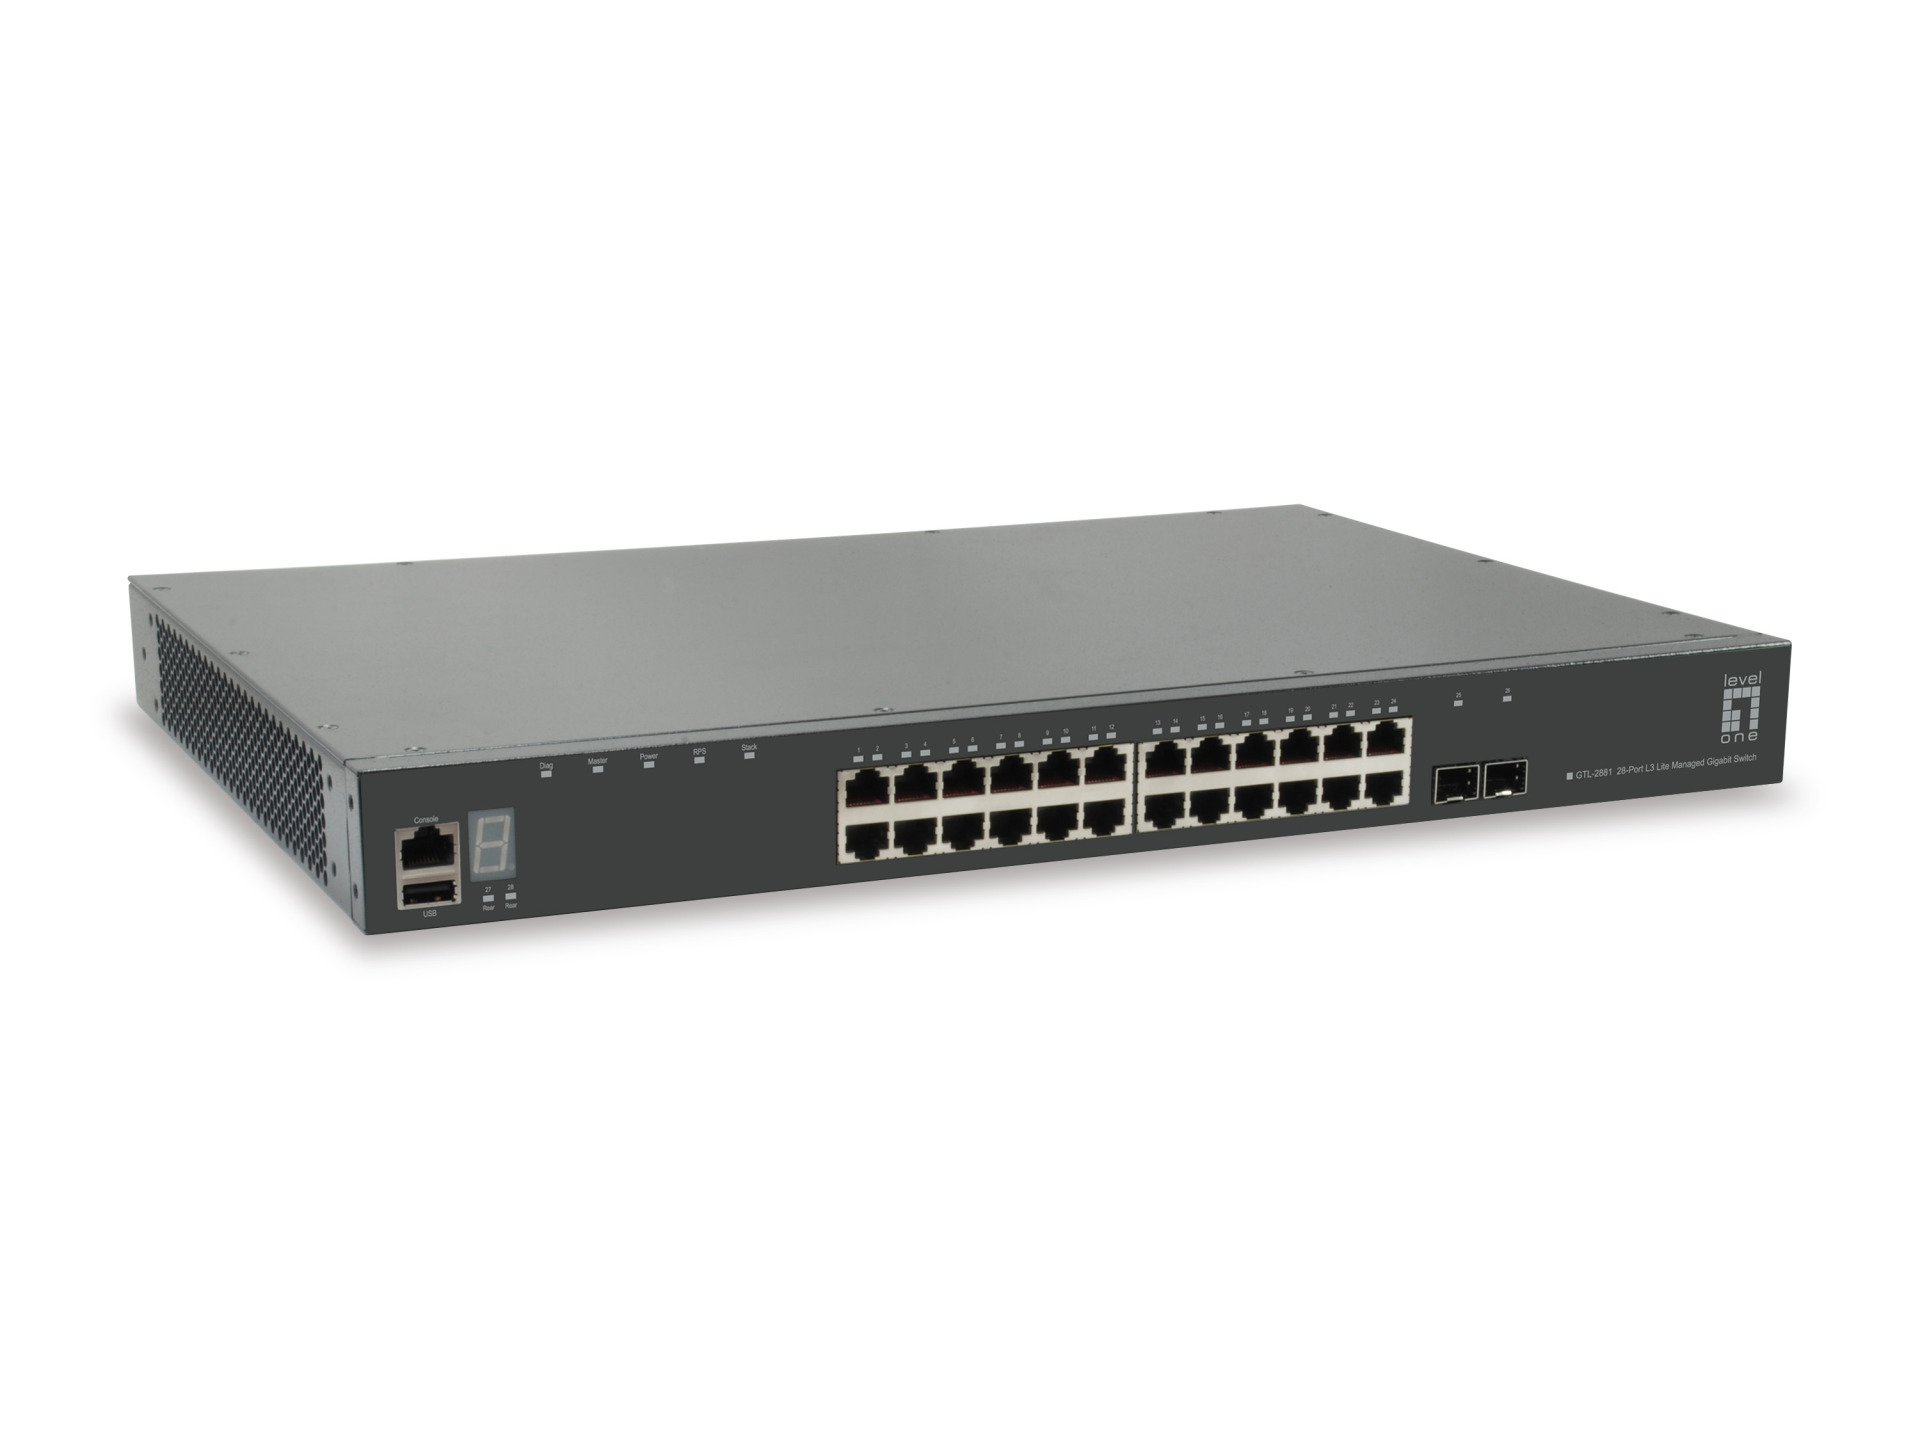 28-Port Stackable L3 Lite Managed GE Switch, 2x 10G SFP+, 1x 10G module slot